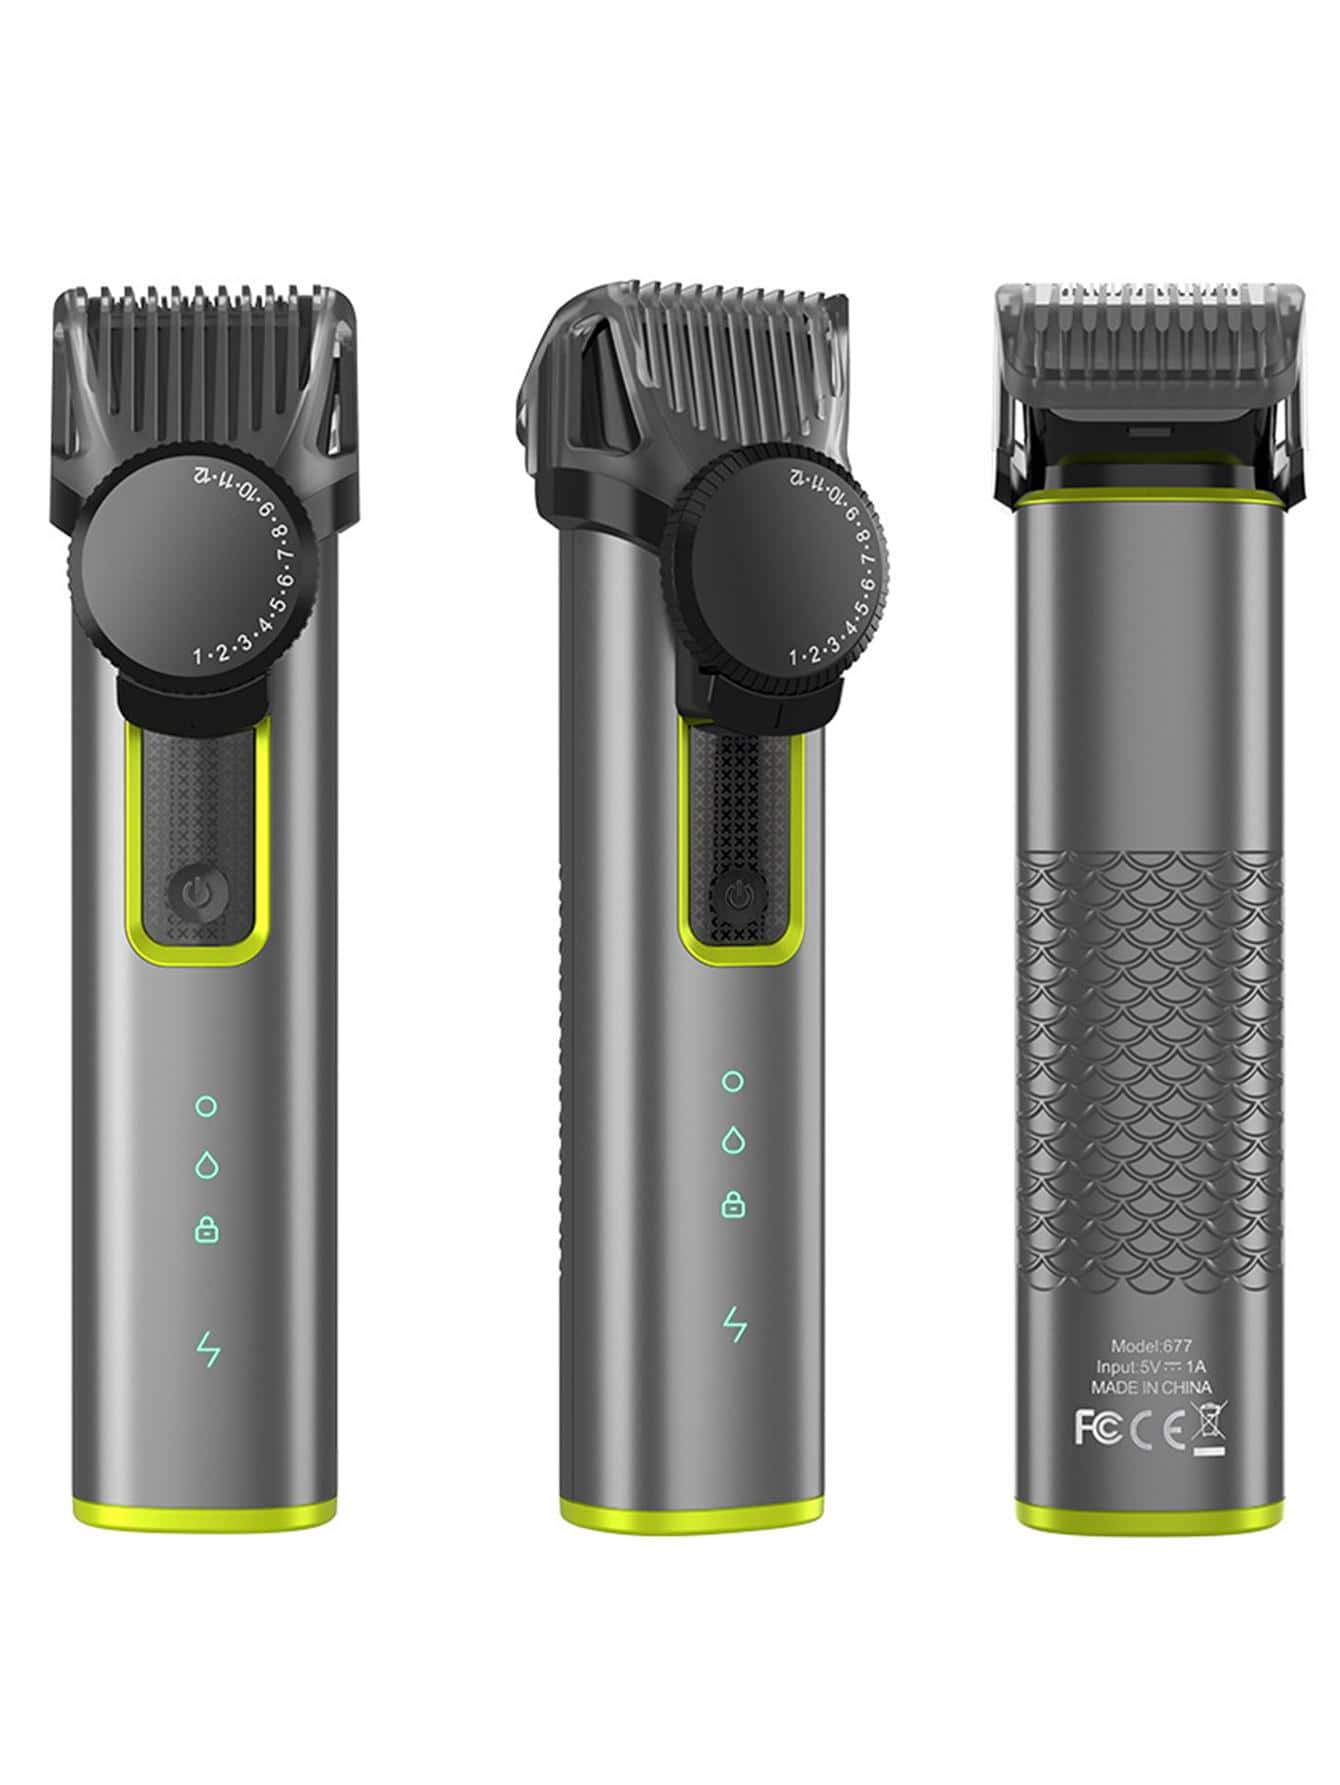 1pc Cordless Beard Trimmer For Men 4 In 1 Hair Trimmer Grooming Kit Adjustable Nose Hair Trimmer USB Rechargeable